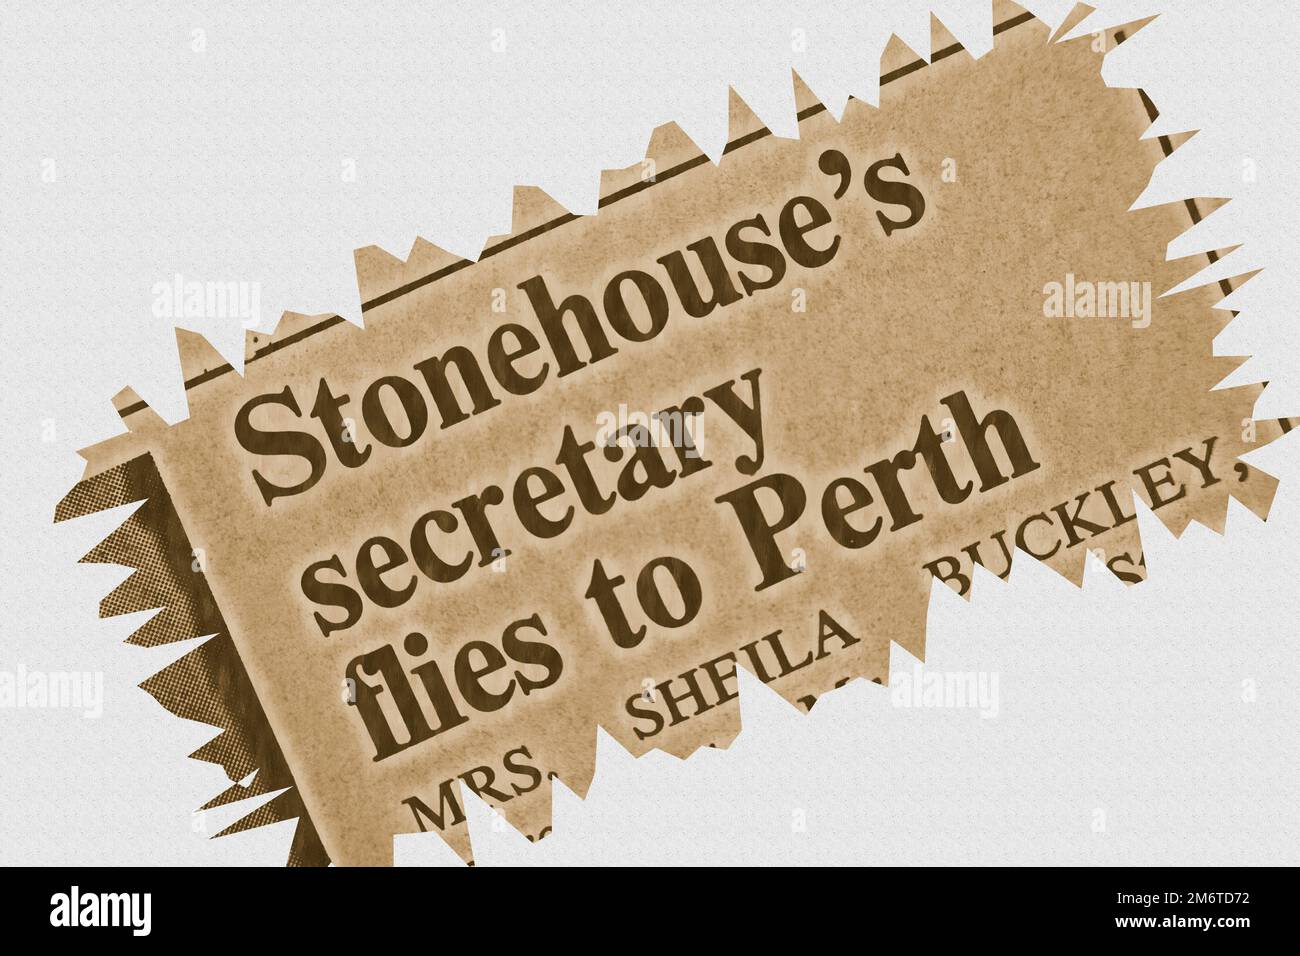 Stonehouse's secretary flies to Perth - news story from 1975 newspaper headline article title with overlay highlight Stock Photo